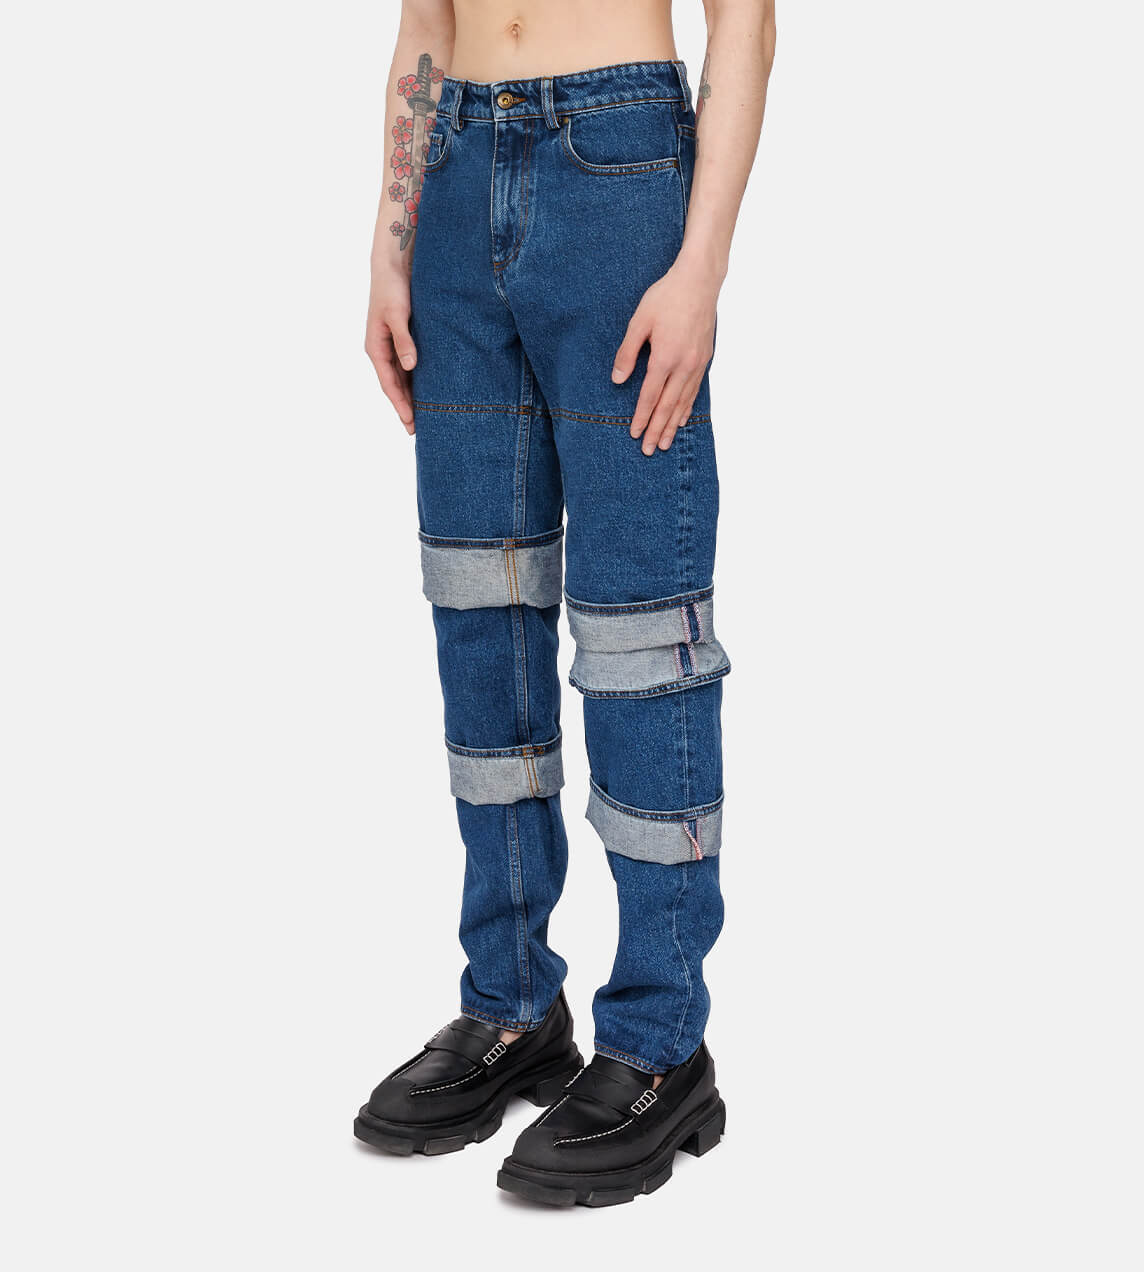 Y/Project - Classic Multi Cuff Jeans Navy